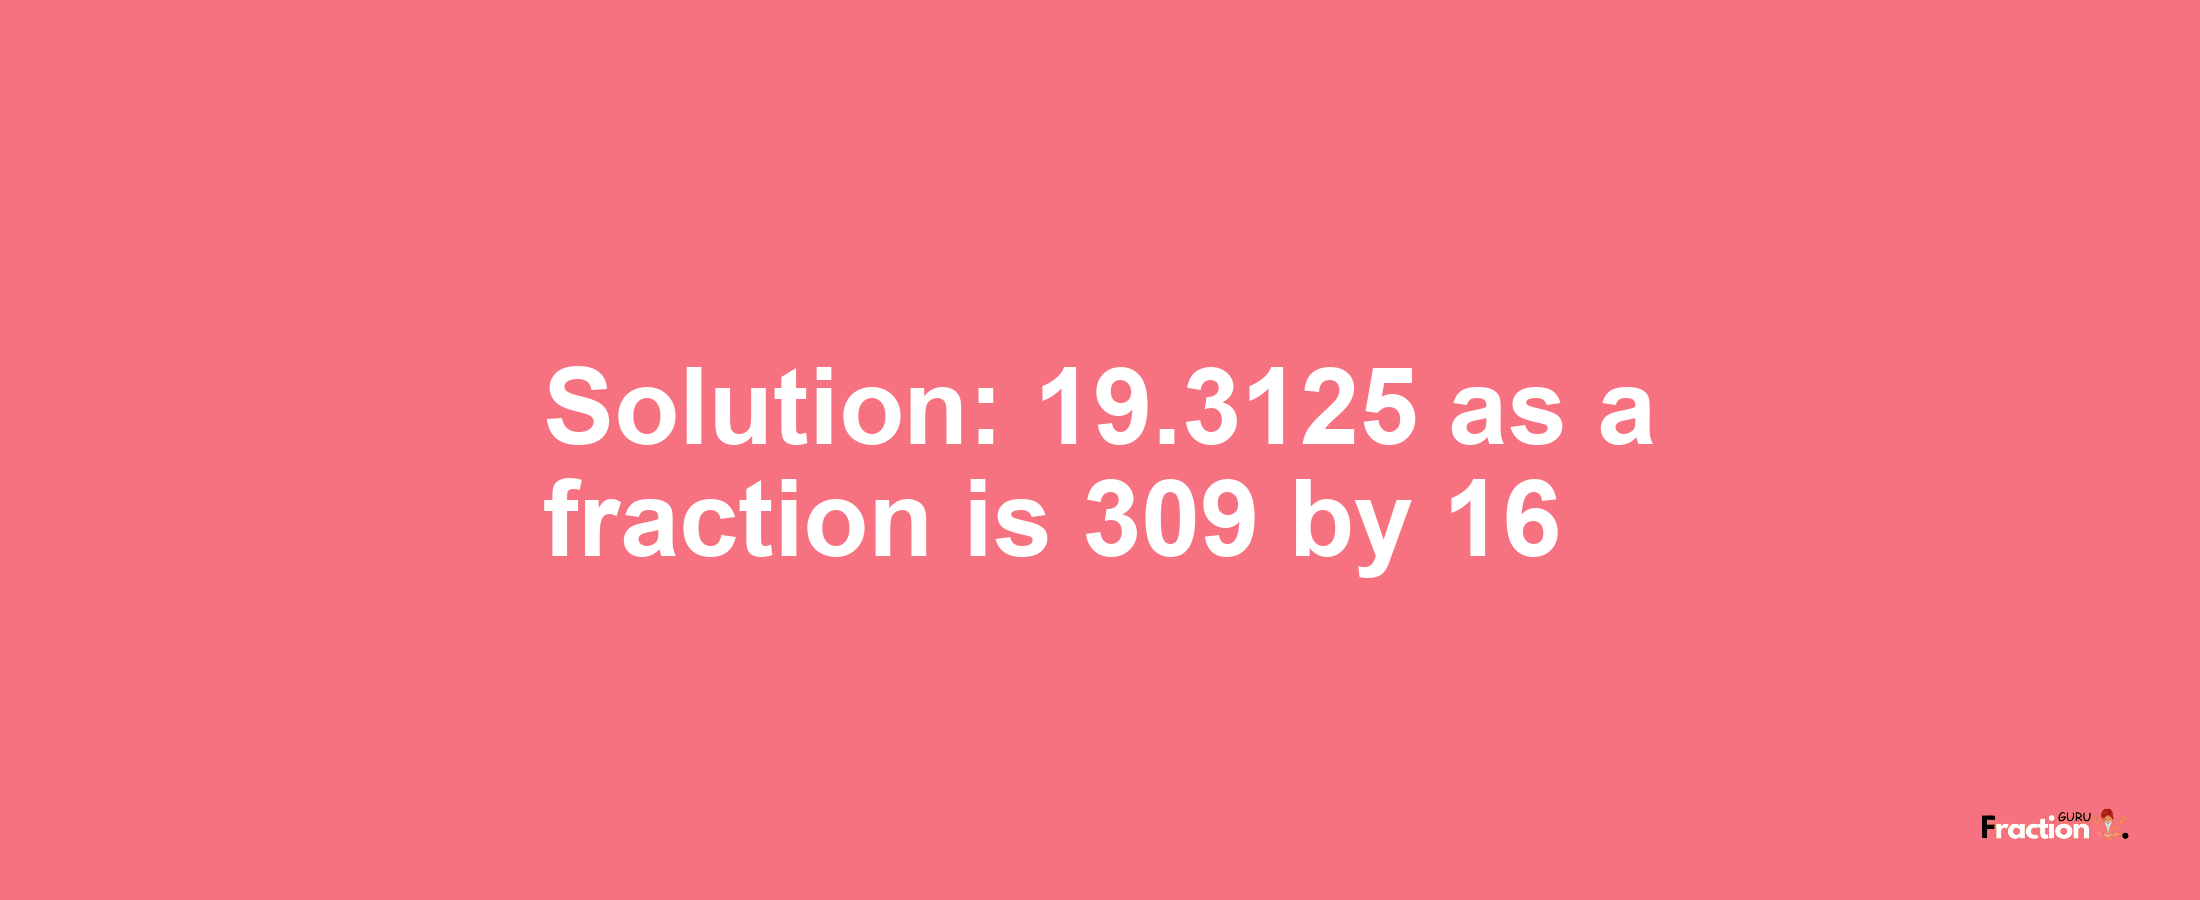 Solution:19.3125 as a fraction is 309/16